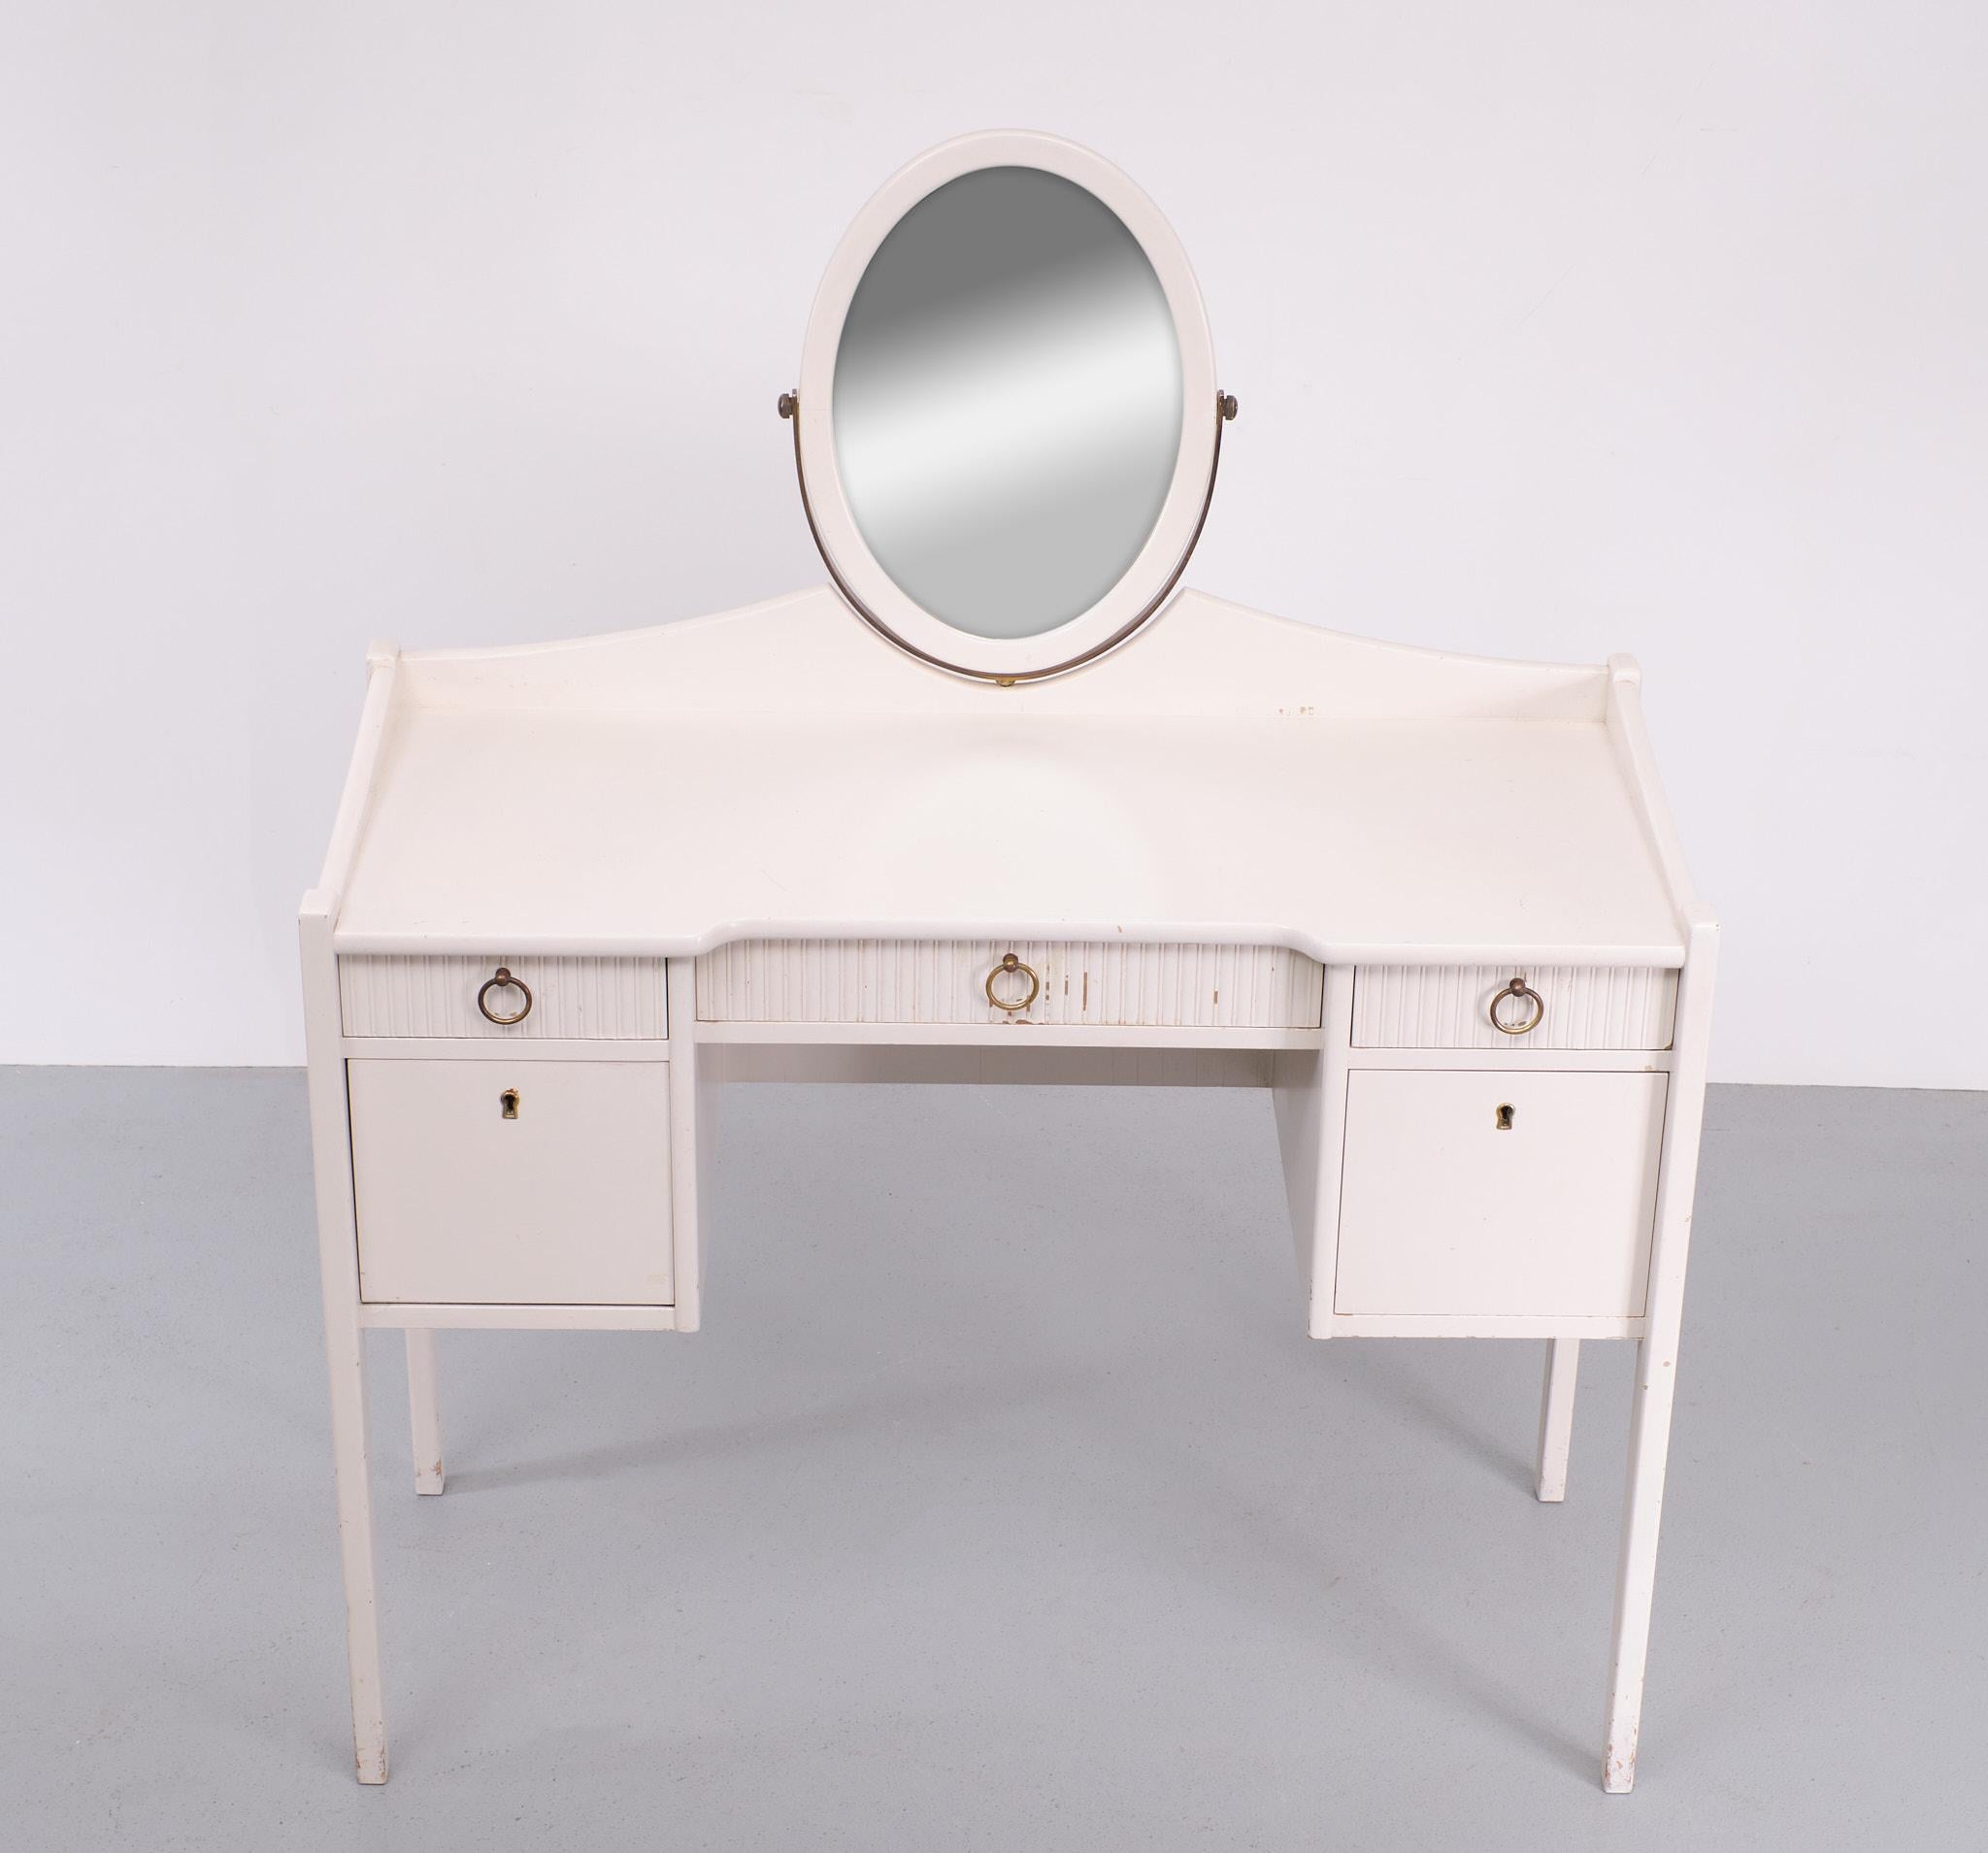 Must love this vanity so typical 1950s .Made by Ikea, Möbler.  In the 1950s 
just a small Furniture seller in Sweden. This Little Vanity comes with Three drawers on top and one larger drawer on the right and on the left a pull down door, one